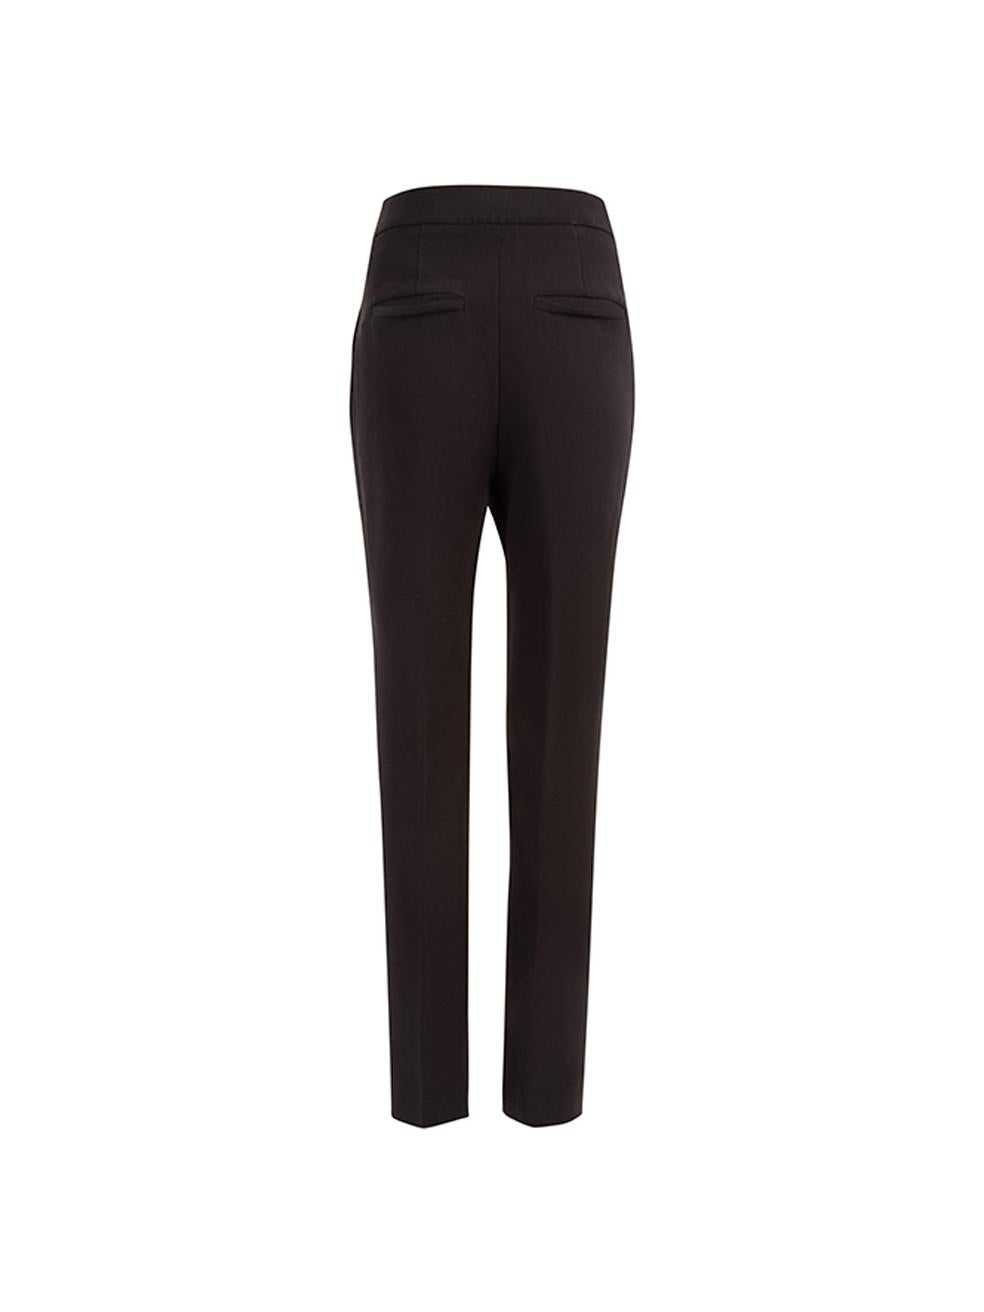 Pre-Loved Balenciaga Women's Black 2014 Slim Leg High Waisted Trousers In Excellent Condition In London, GB